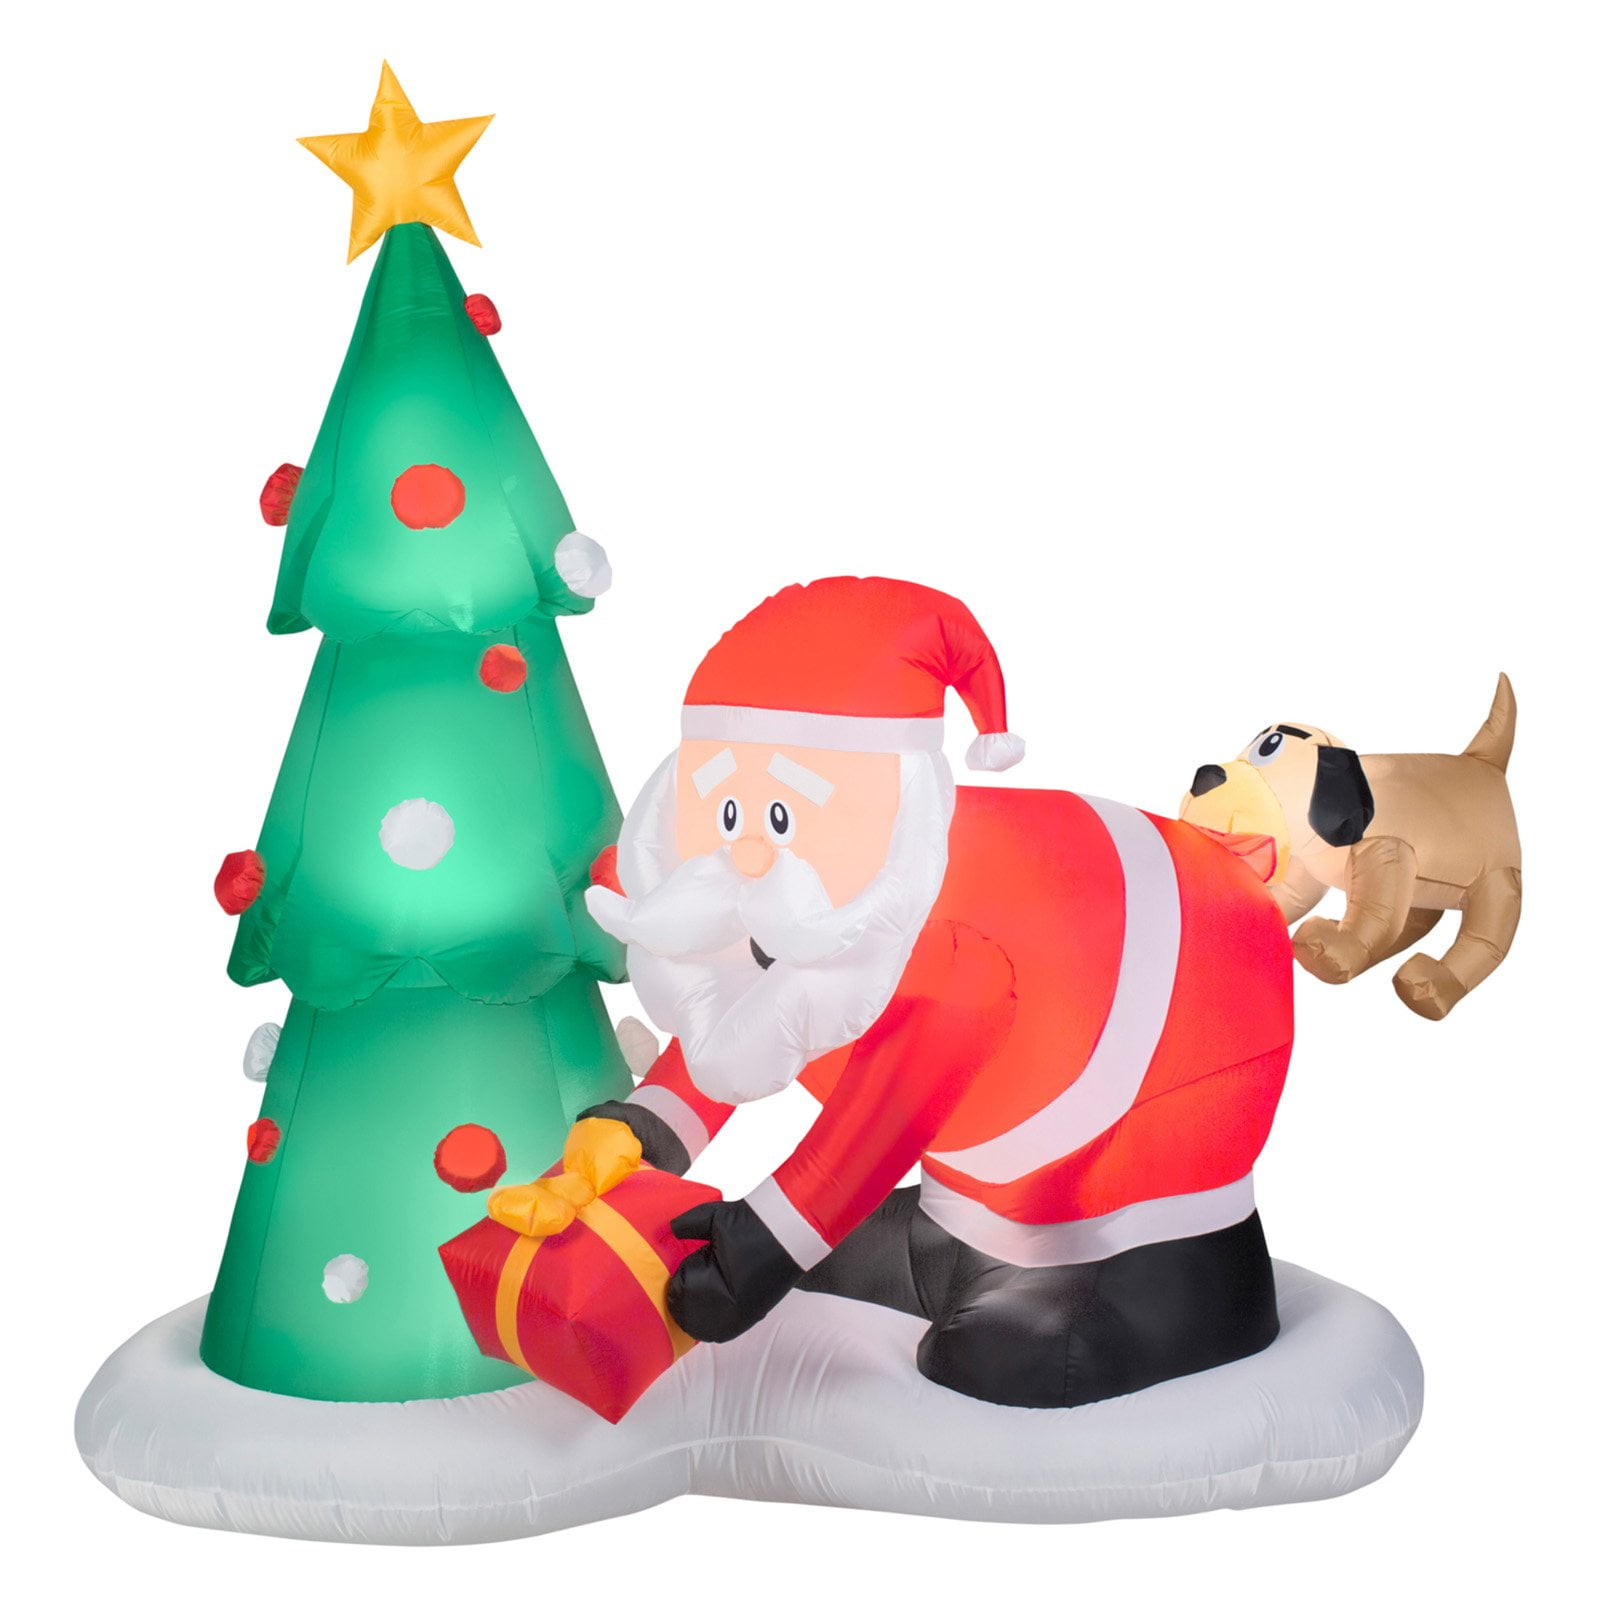 Airblown Inflatables Santa and Dog Scene Inflatable - Walmart.com